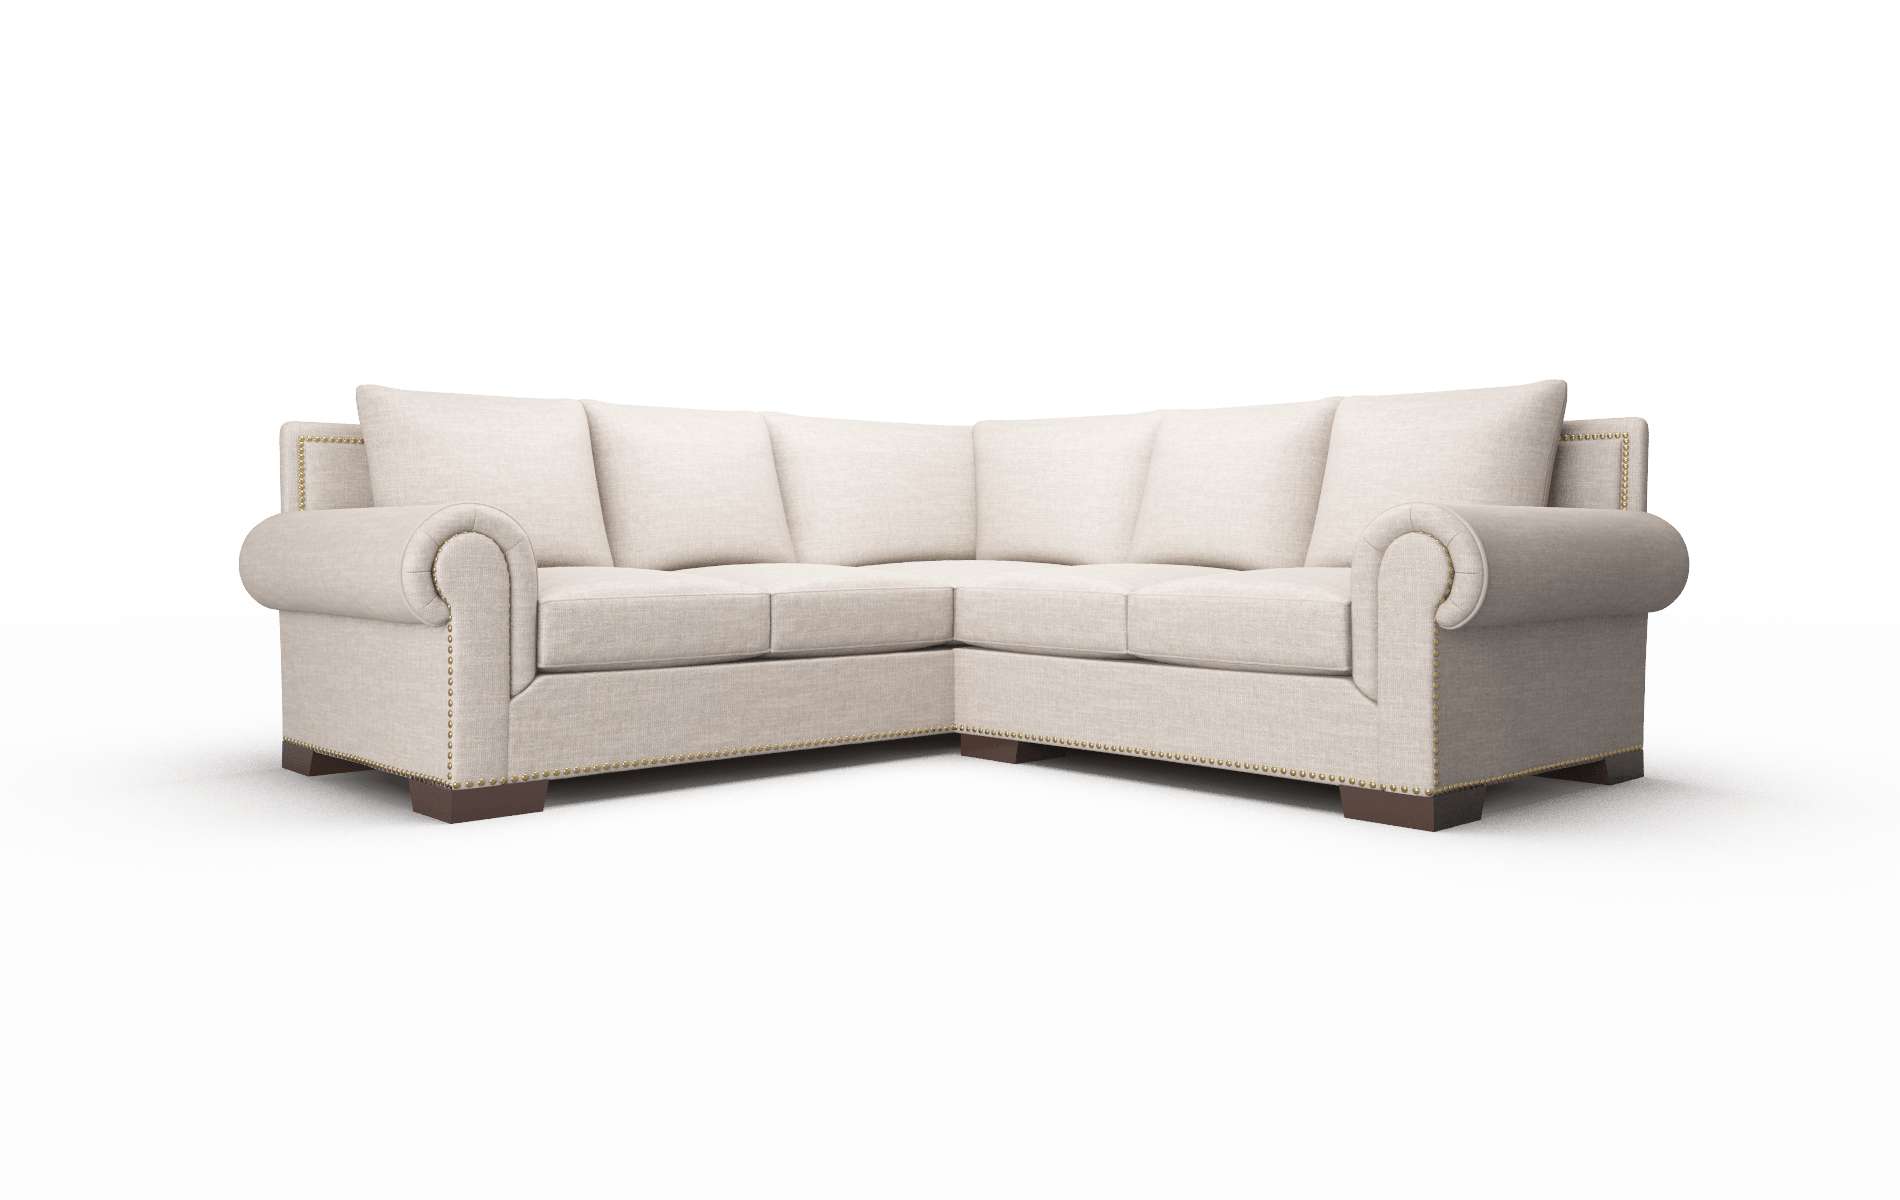 James Clyde Dolphin Sectional espresso legs